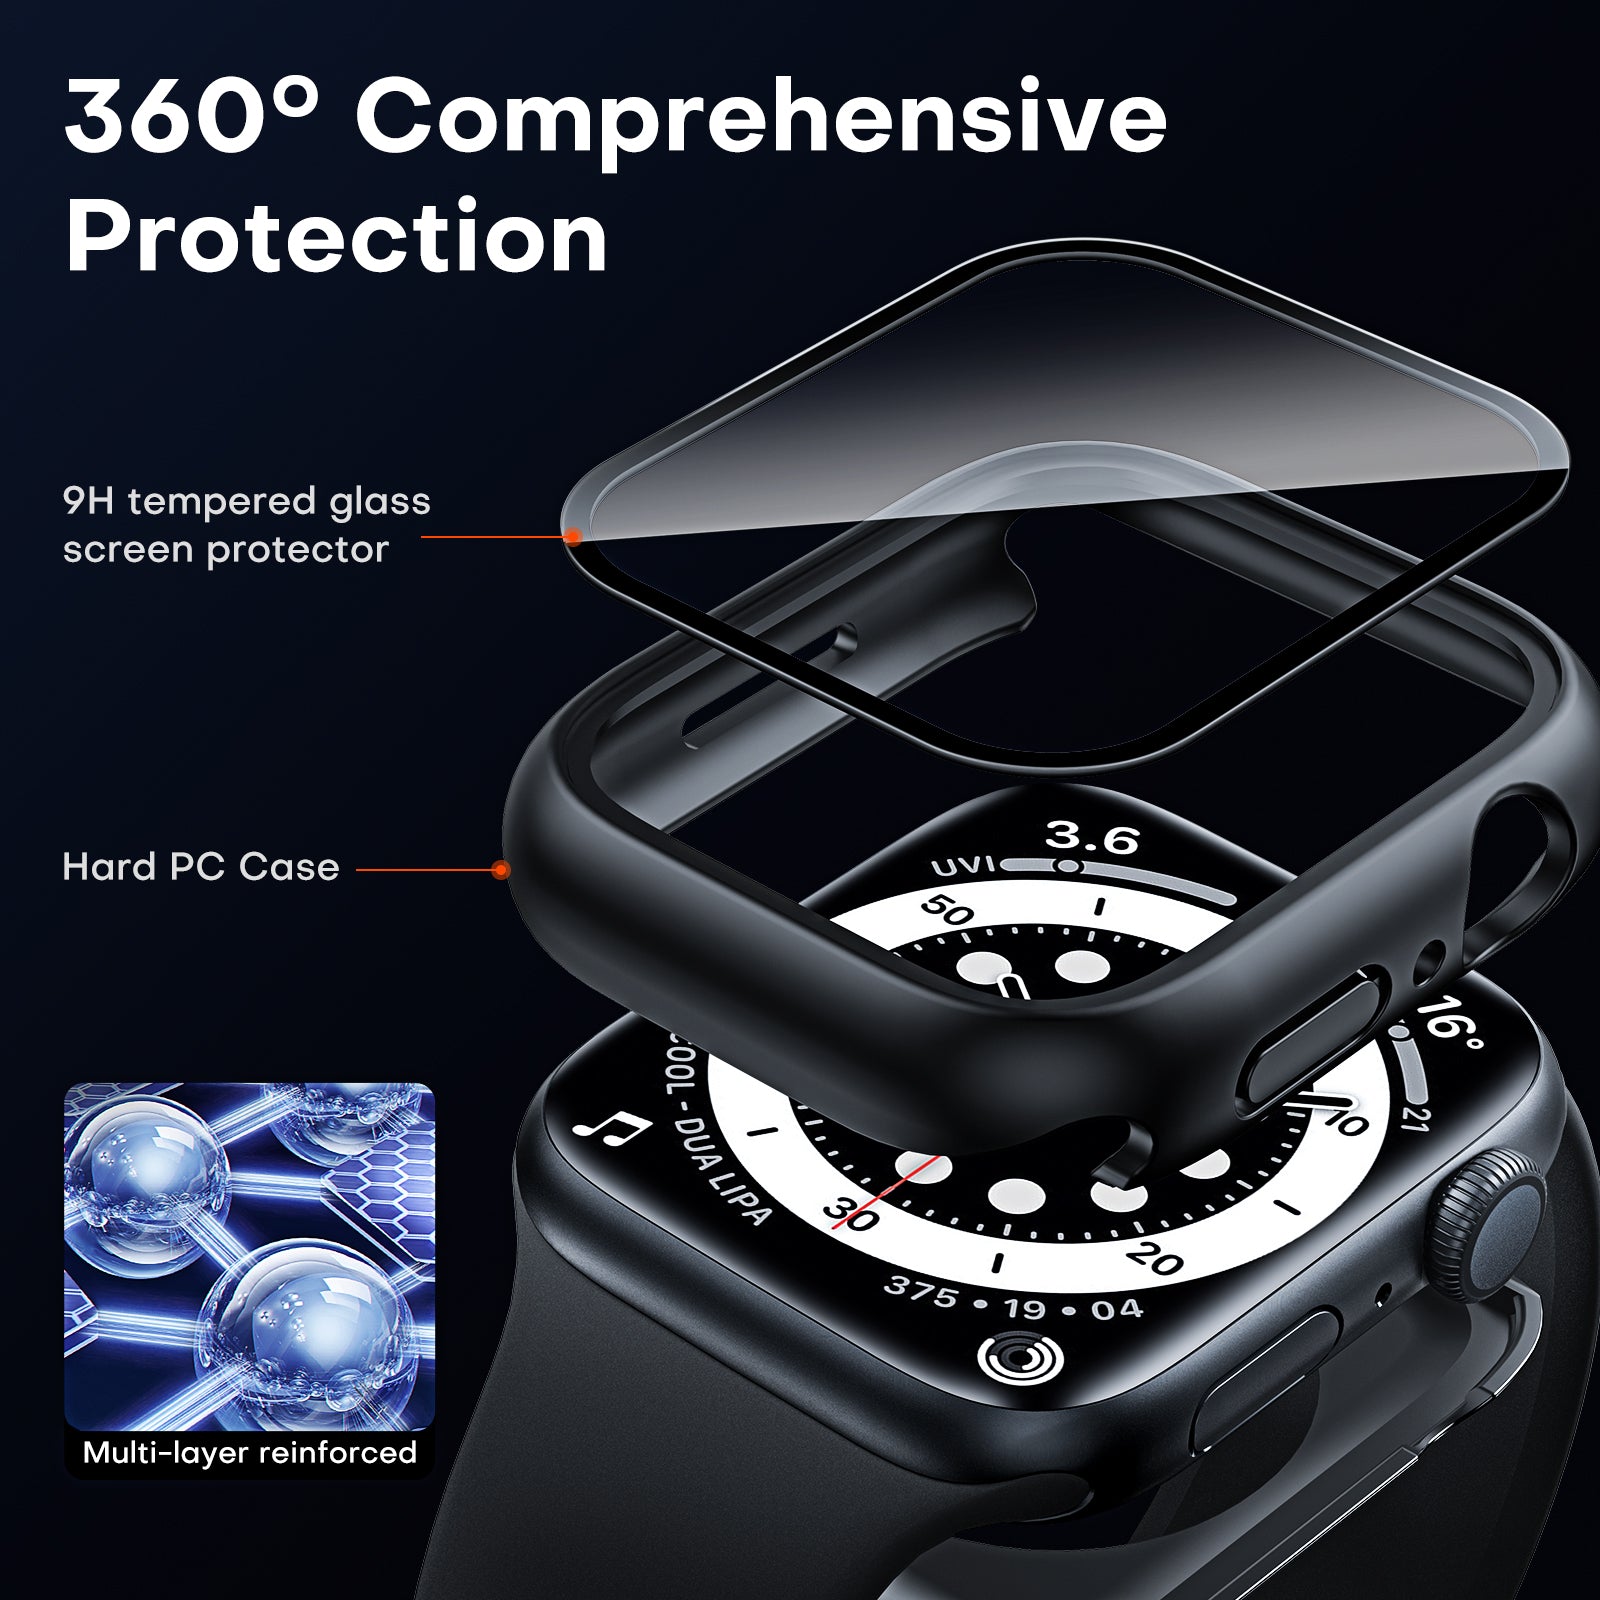 TAURI 2 Pack Waterproof Case Designed for Apple Watch Series SE/6/5/4 40mm, [IP67 Waterproof Certified] with 9H Tempered Glass Screen Protector, [Full Protection] Slim Cover for iWatch 40mm - Black